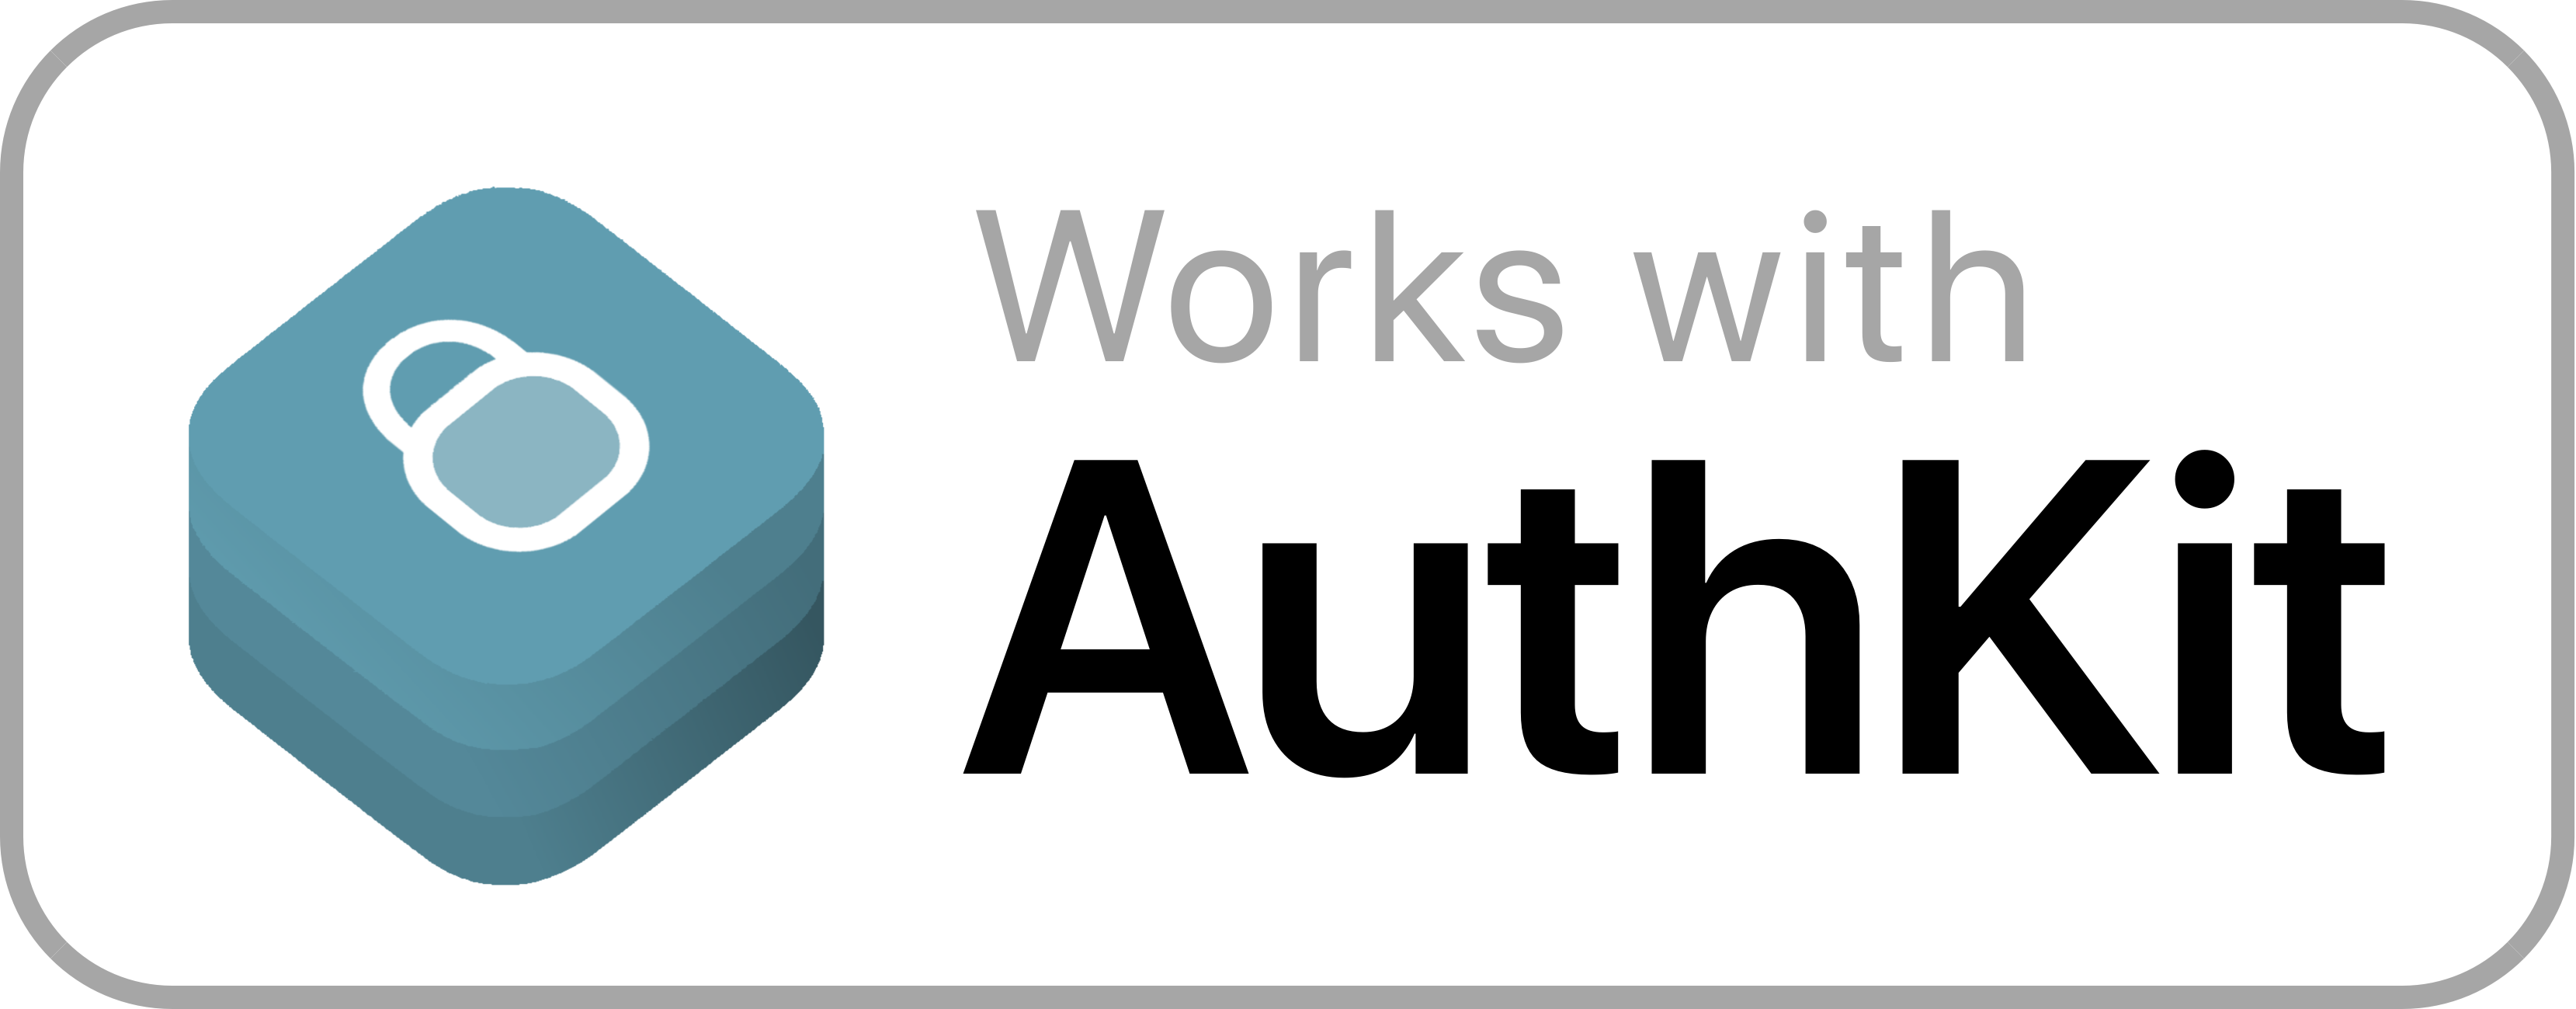 Works with AuthKit